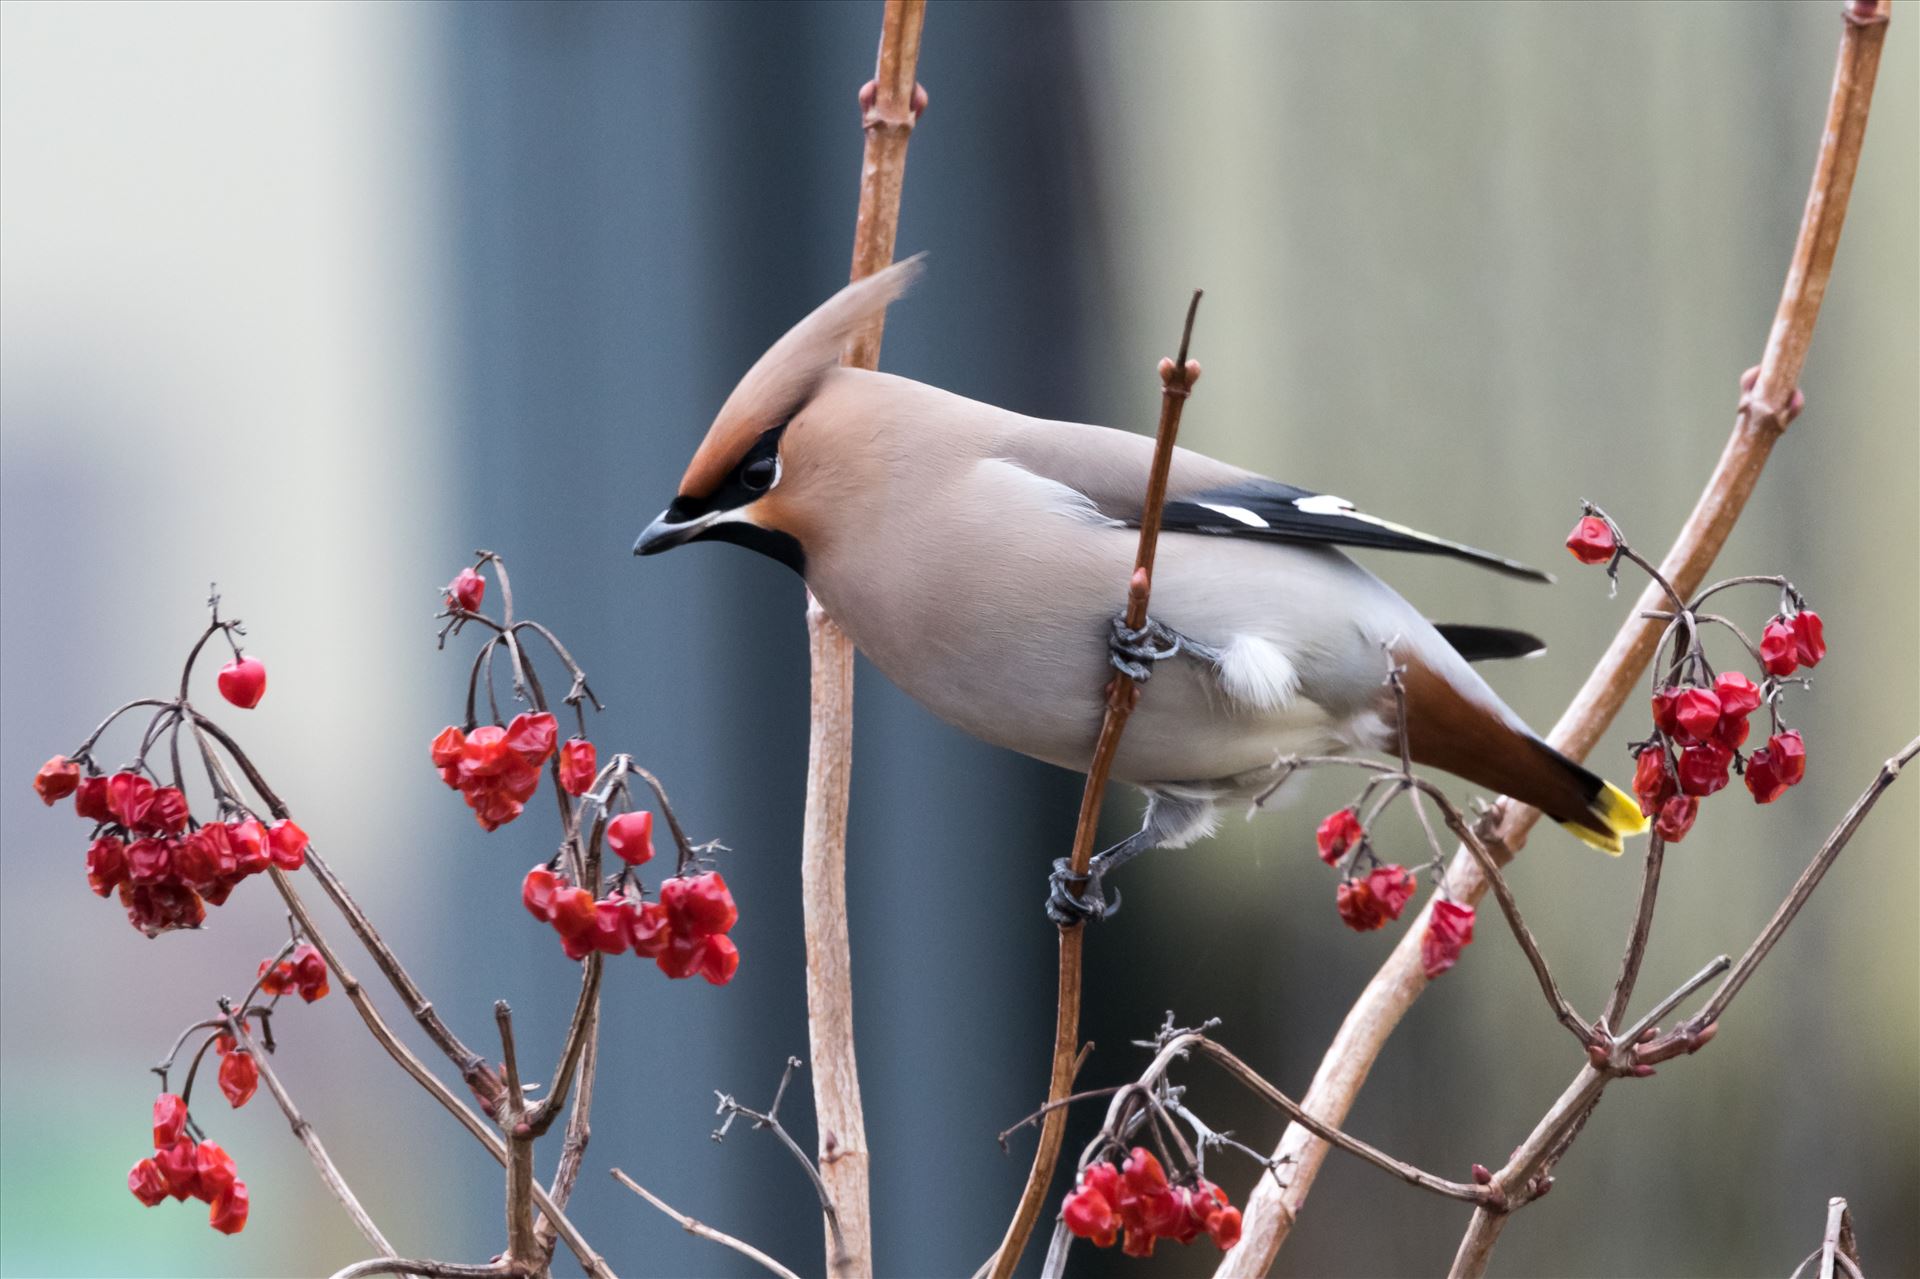 Waxwing RSPB Saltholme A winter visiter, Waxwing, taken in January 2017 at RSPB Saltholme by AJ Stoves Photography